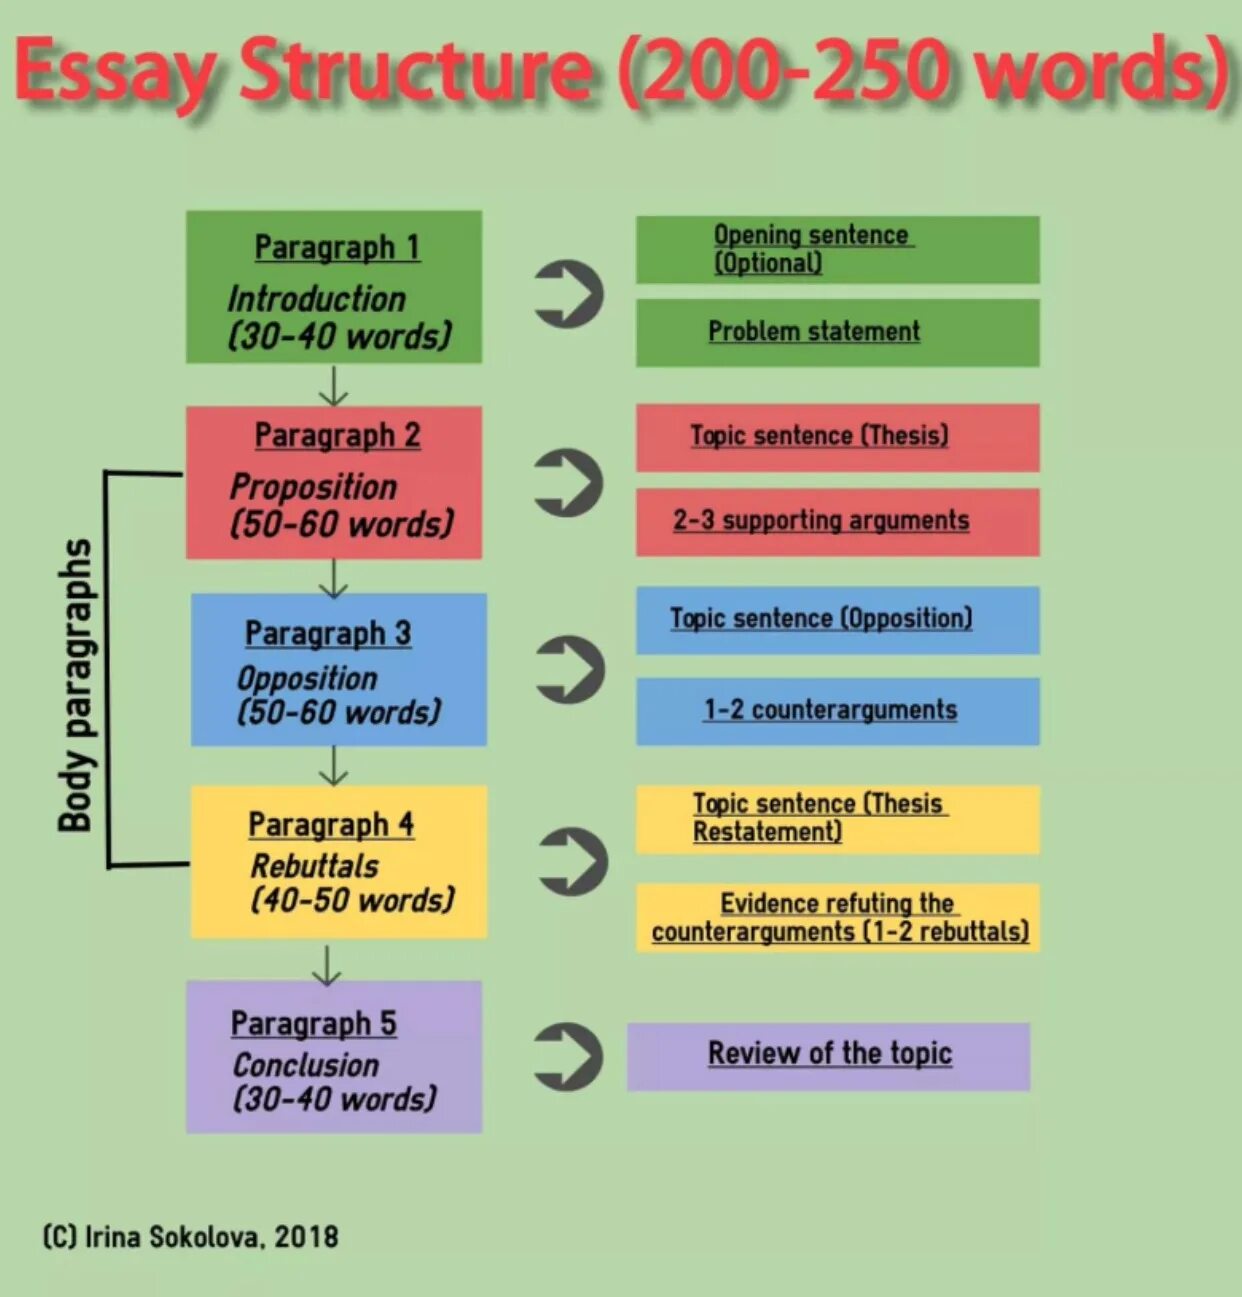 Essay structure. Discussion essay structure. The essays. Essay in English structure. Discuss essay